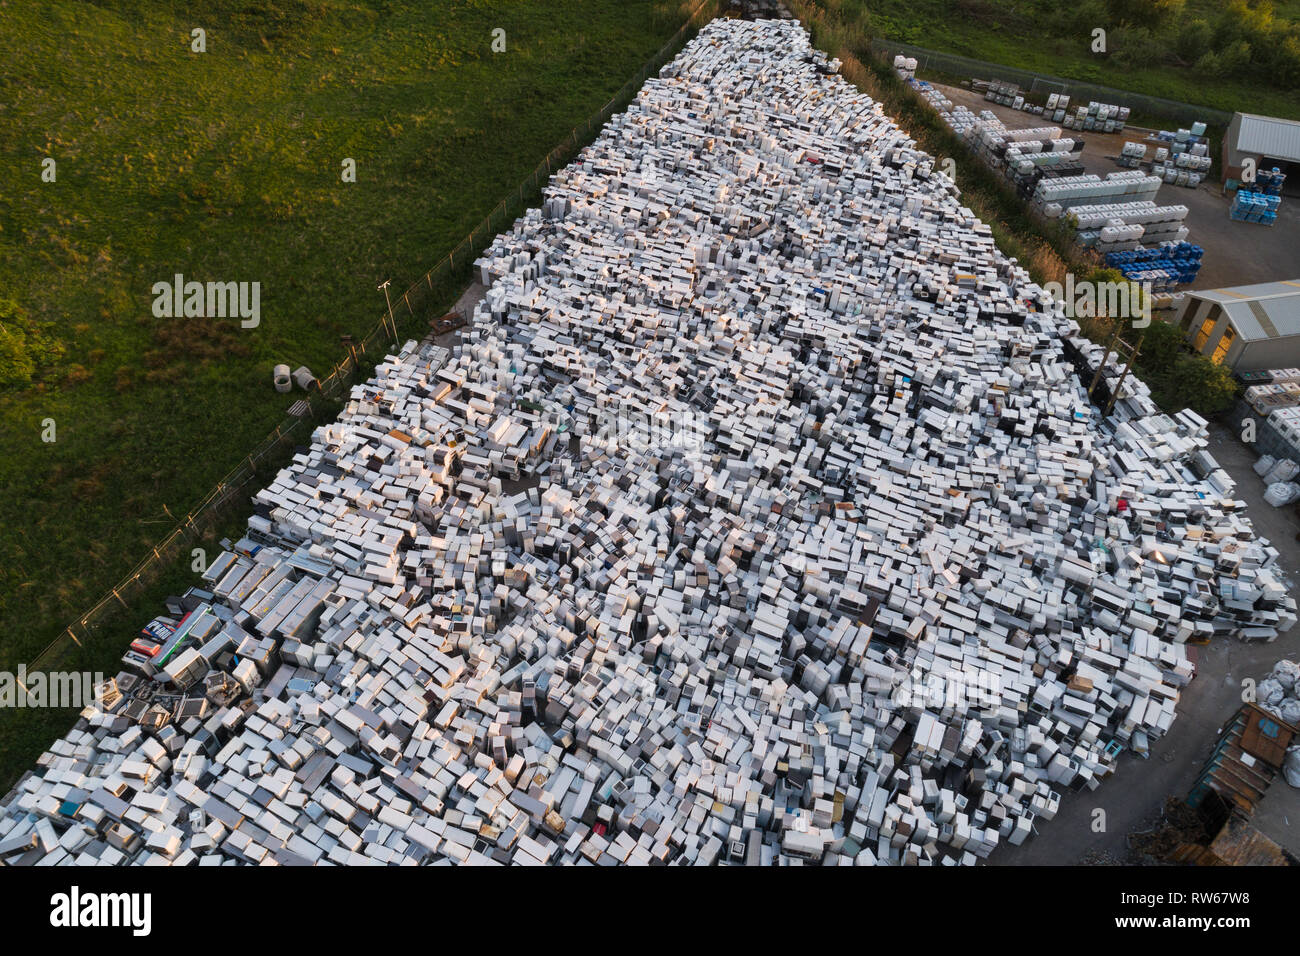 Aerial image of a fridge recycling and disposal yard in Perth, Scotland, showing thousands of used refrigerators in stacks. Stock Photo